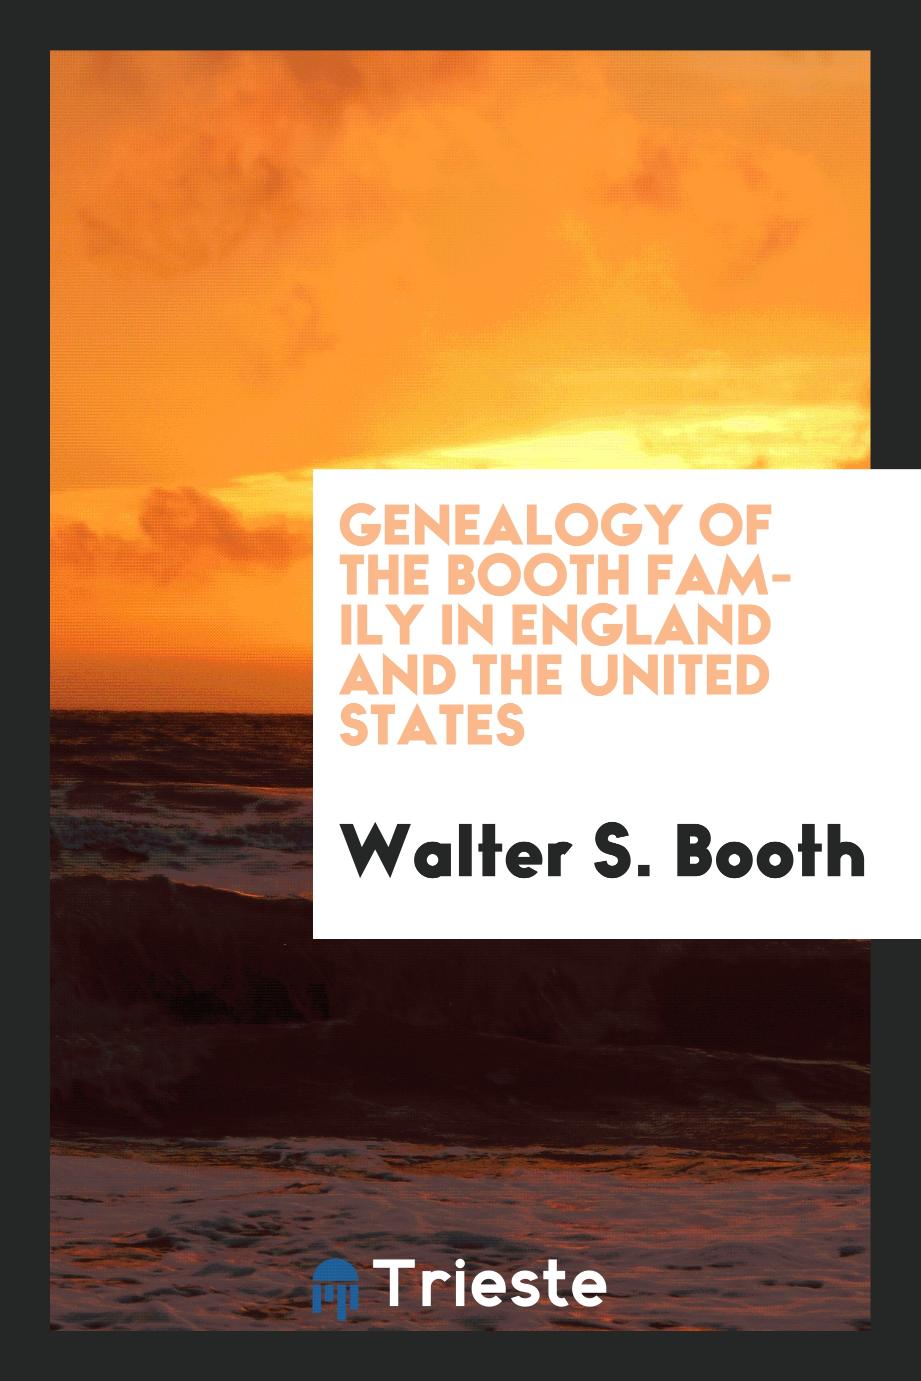 Genealogy of the Booth family in England and the United States